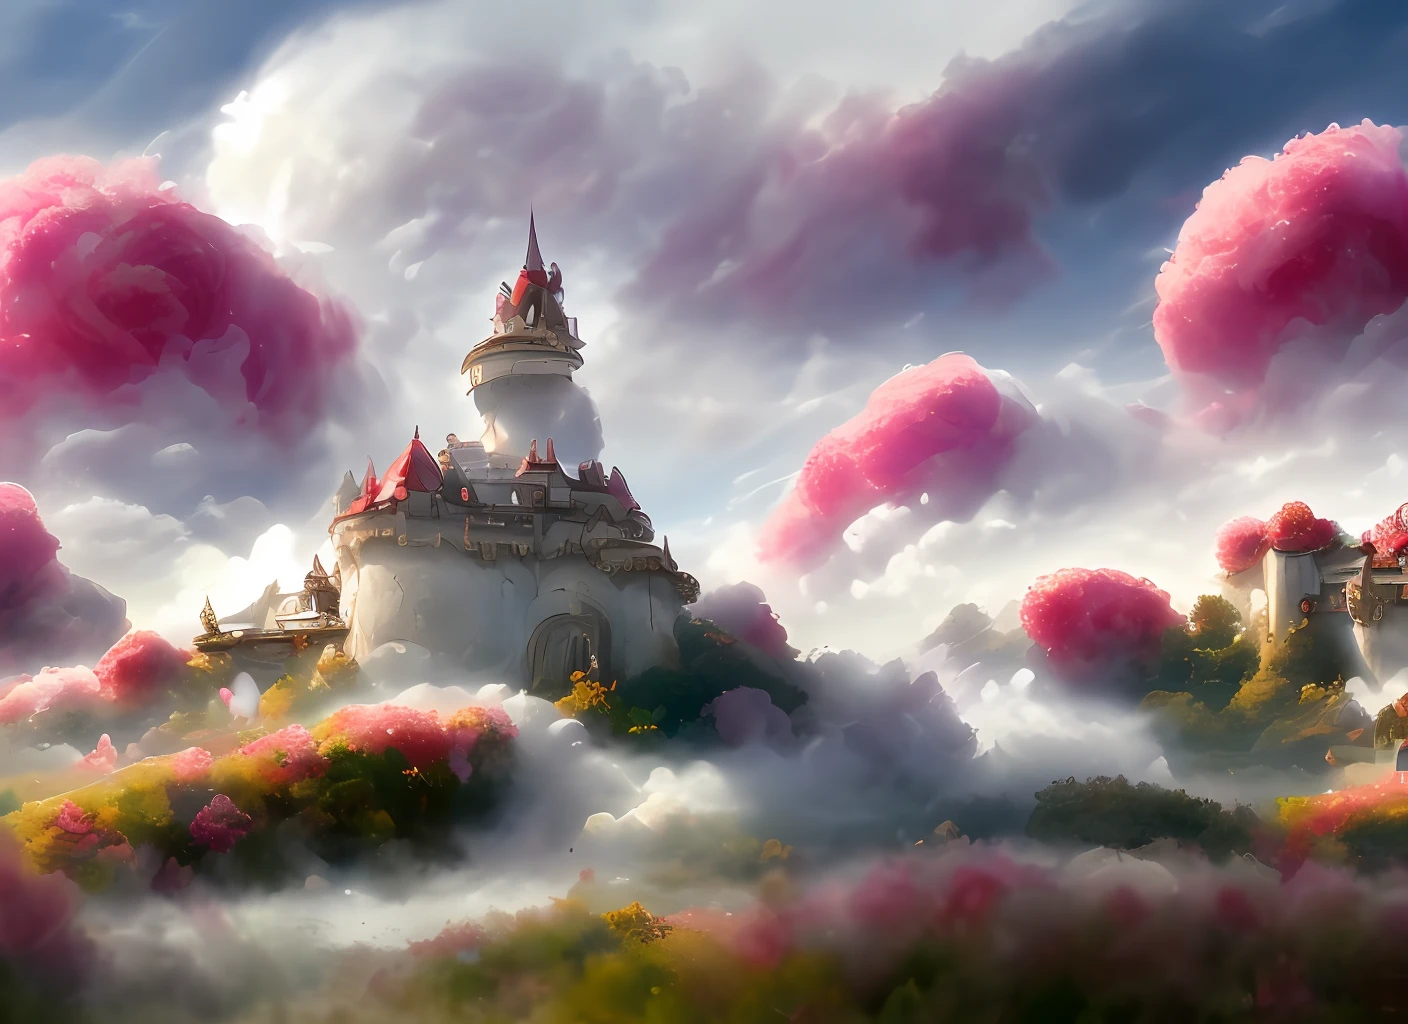 a discodifland with swirling clouds and flowers, (sky rose fantasy castle), (red roses), (ridiculous), dreamy, disney, painted by Thomas Kincaid, artstation, sharp focus, inspiring 8k wallpaper,